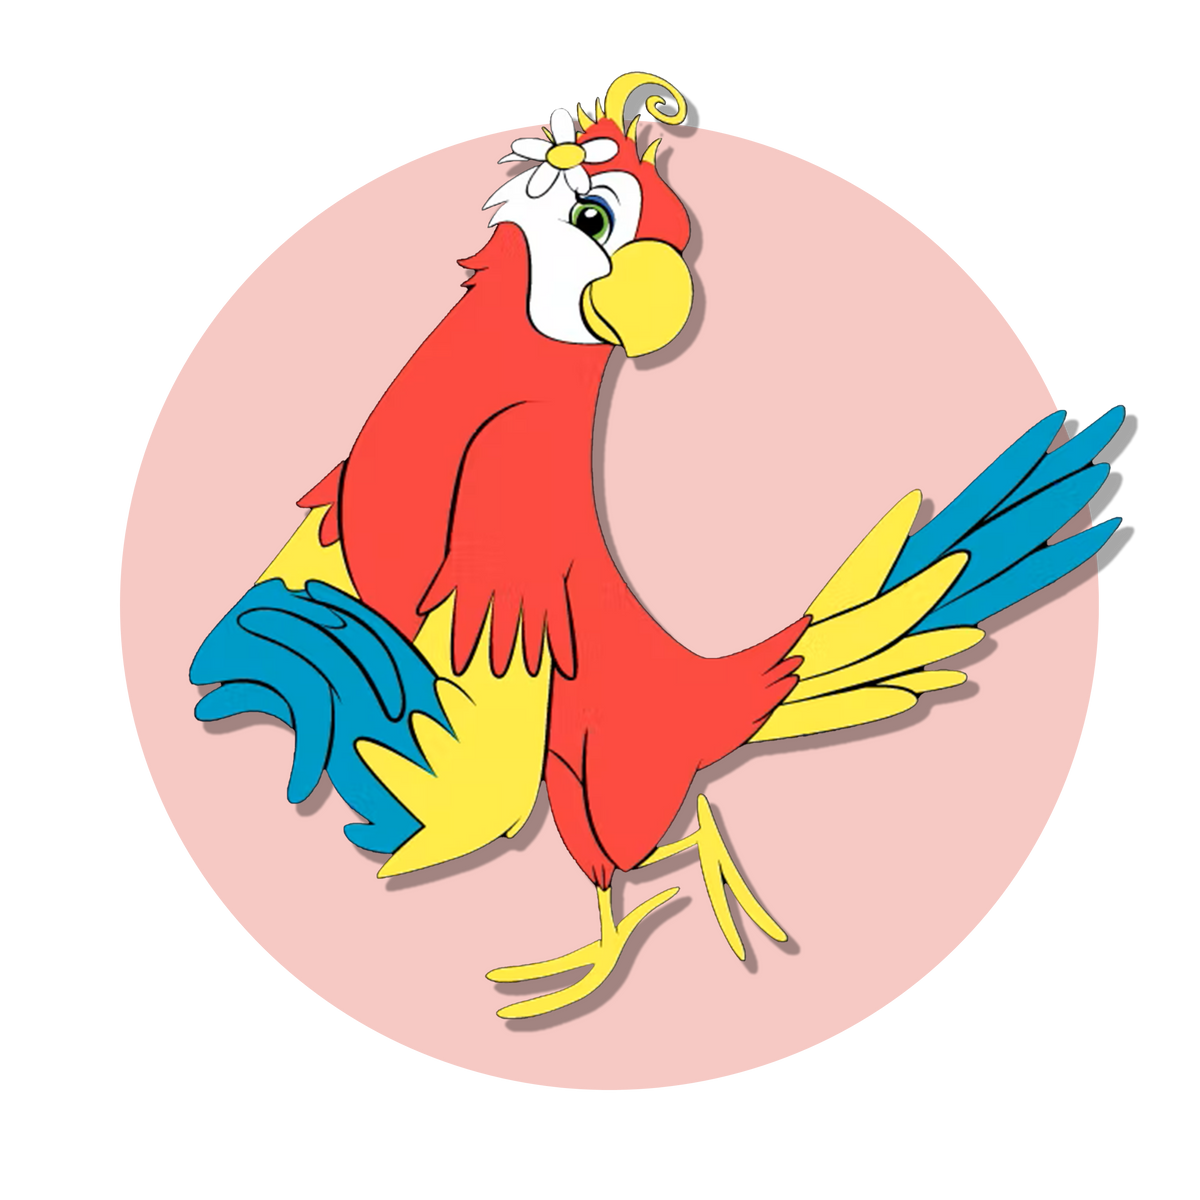 The image you’ve shared is a colorful illustration of a cartoon parrot. This parrot has vibrant red feathers with touches of yellow, blue, and green on its wings and tail. It’s standing on one leg, with its head playfully tilted to the side and a whimsical curly feather on top of its head. The background features a soft pink circle that frames the parrot beautifully, enhancing its playful and cheerful appearance. 